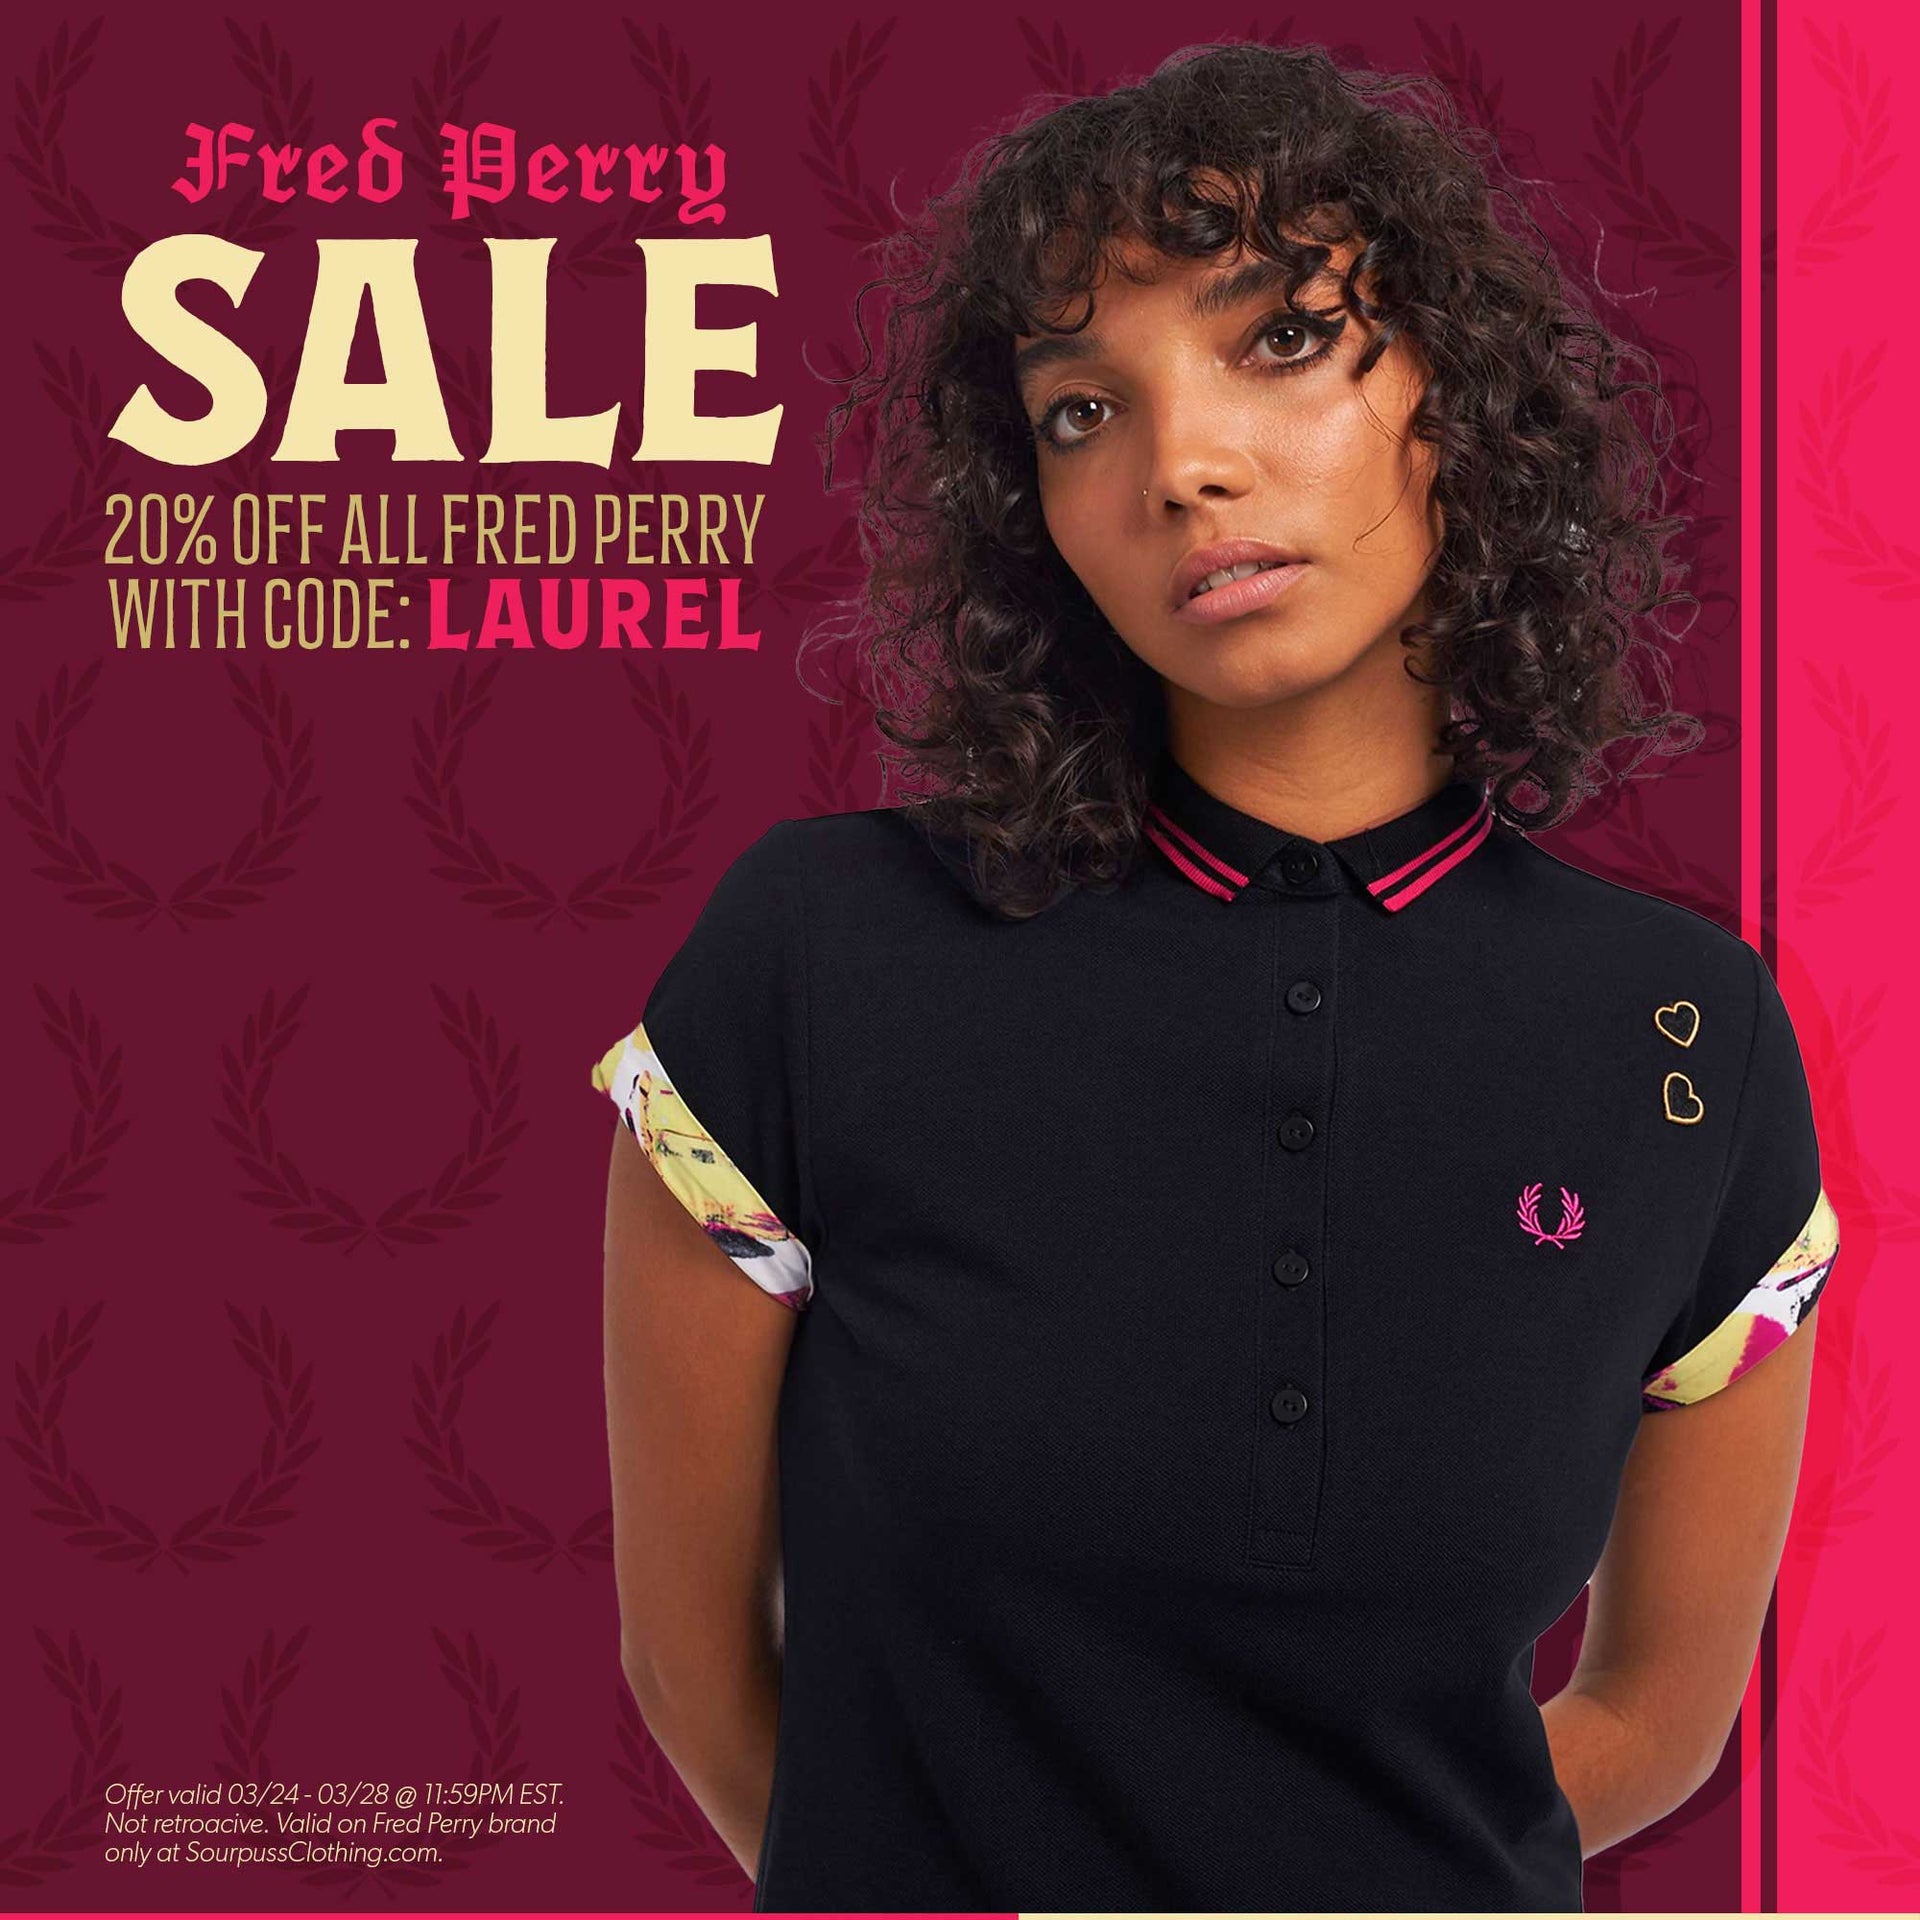 🖤 FRED PERRY SALE! 🖤